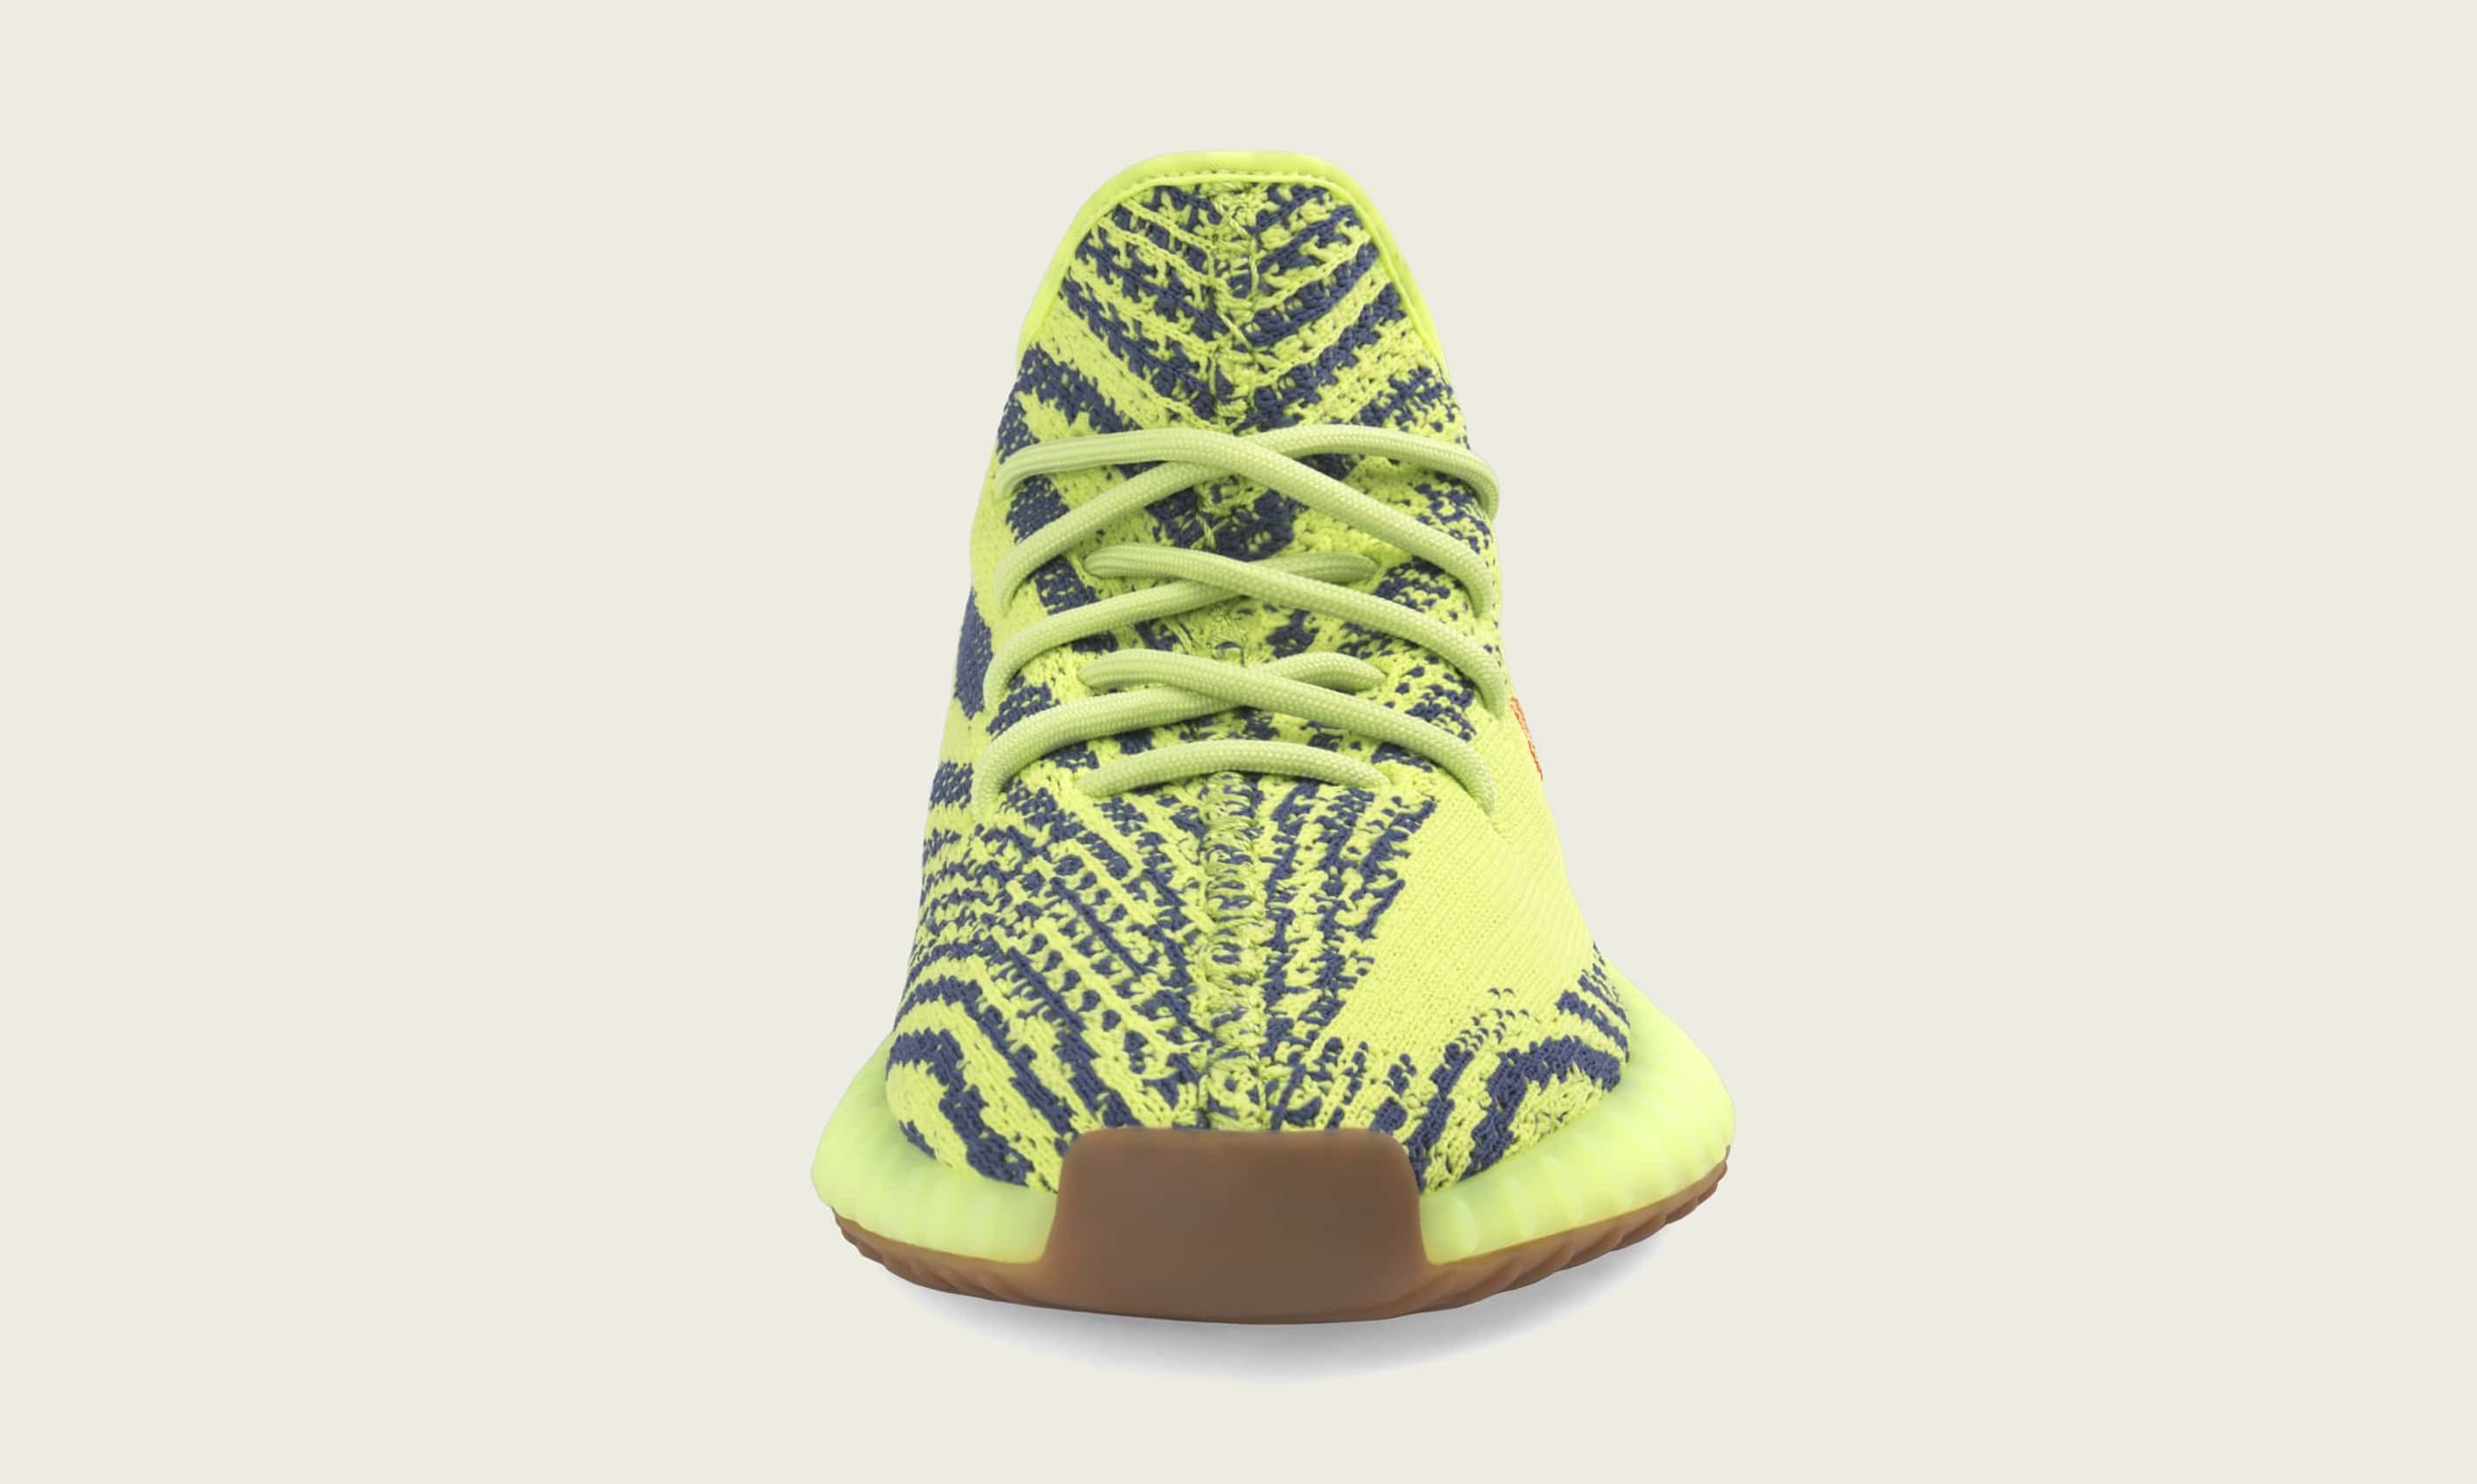 Yeezy Boost V2 'Semi Frozen Yellow' B37572 Images | Sole Collector